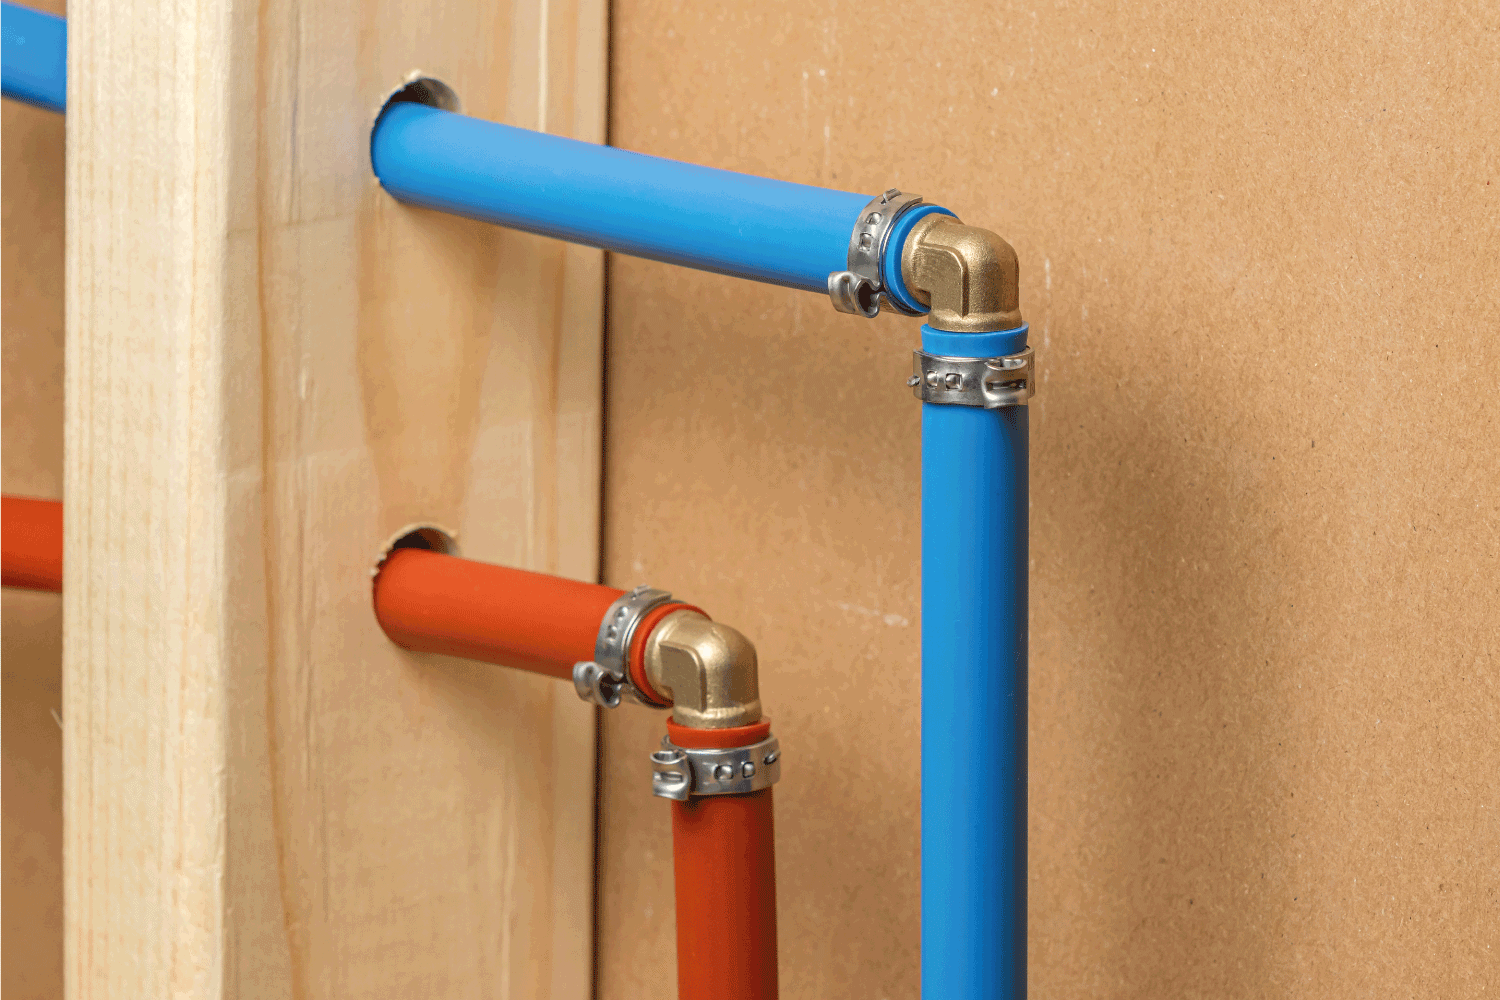 Pex plastic water supply plumbing pipe in wall of house